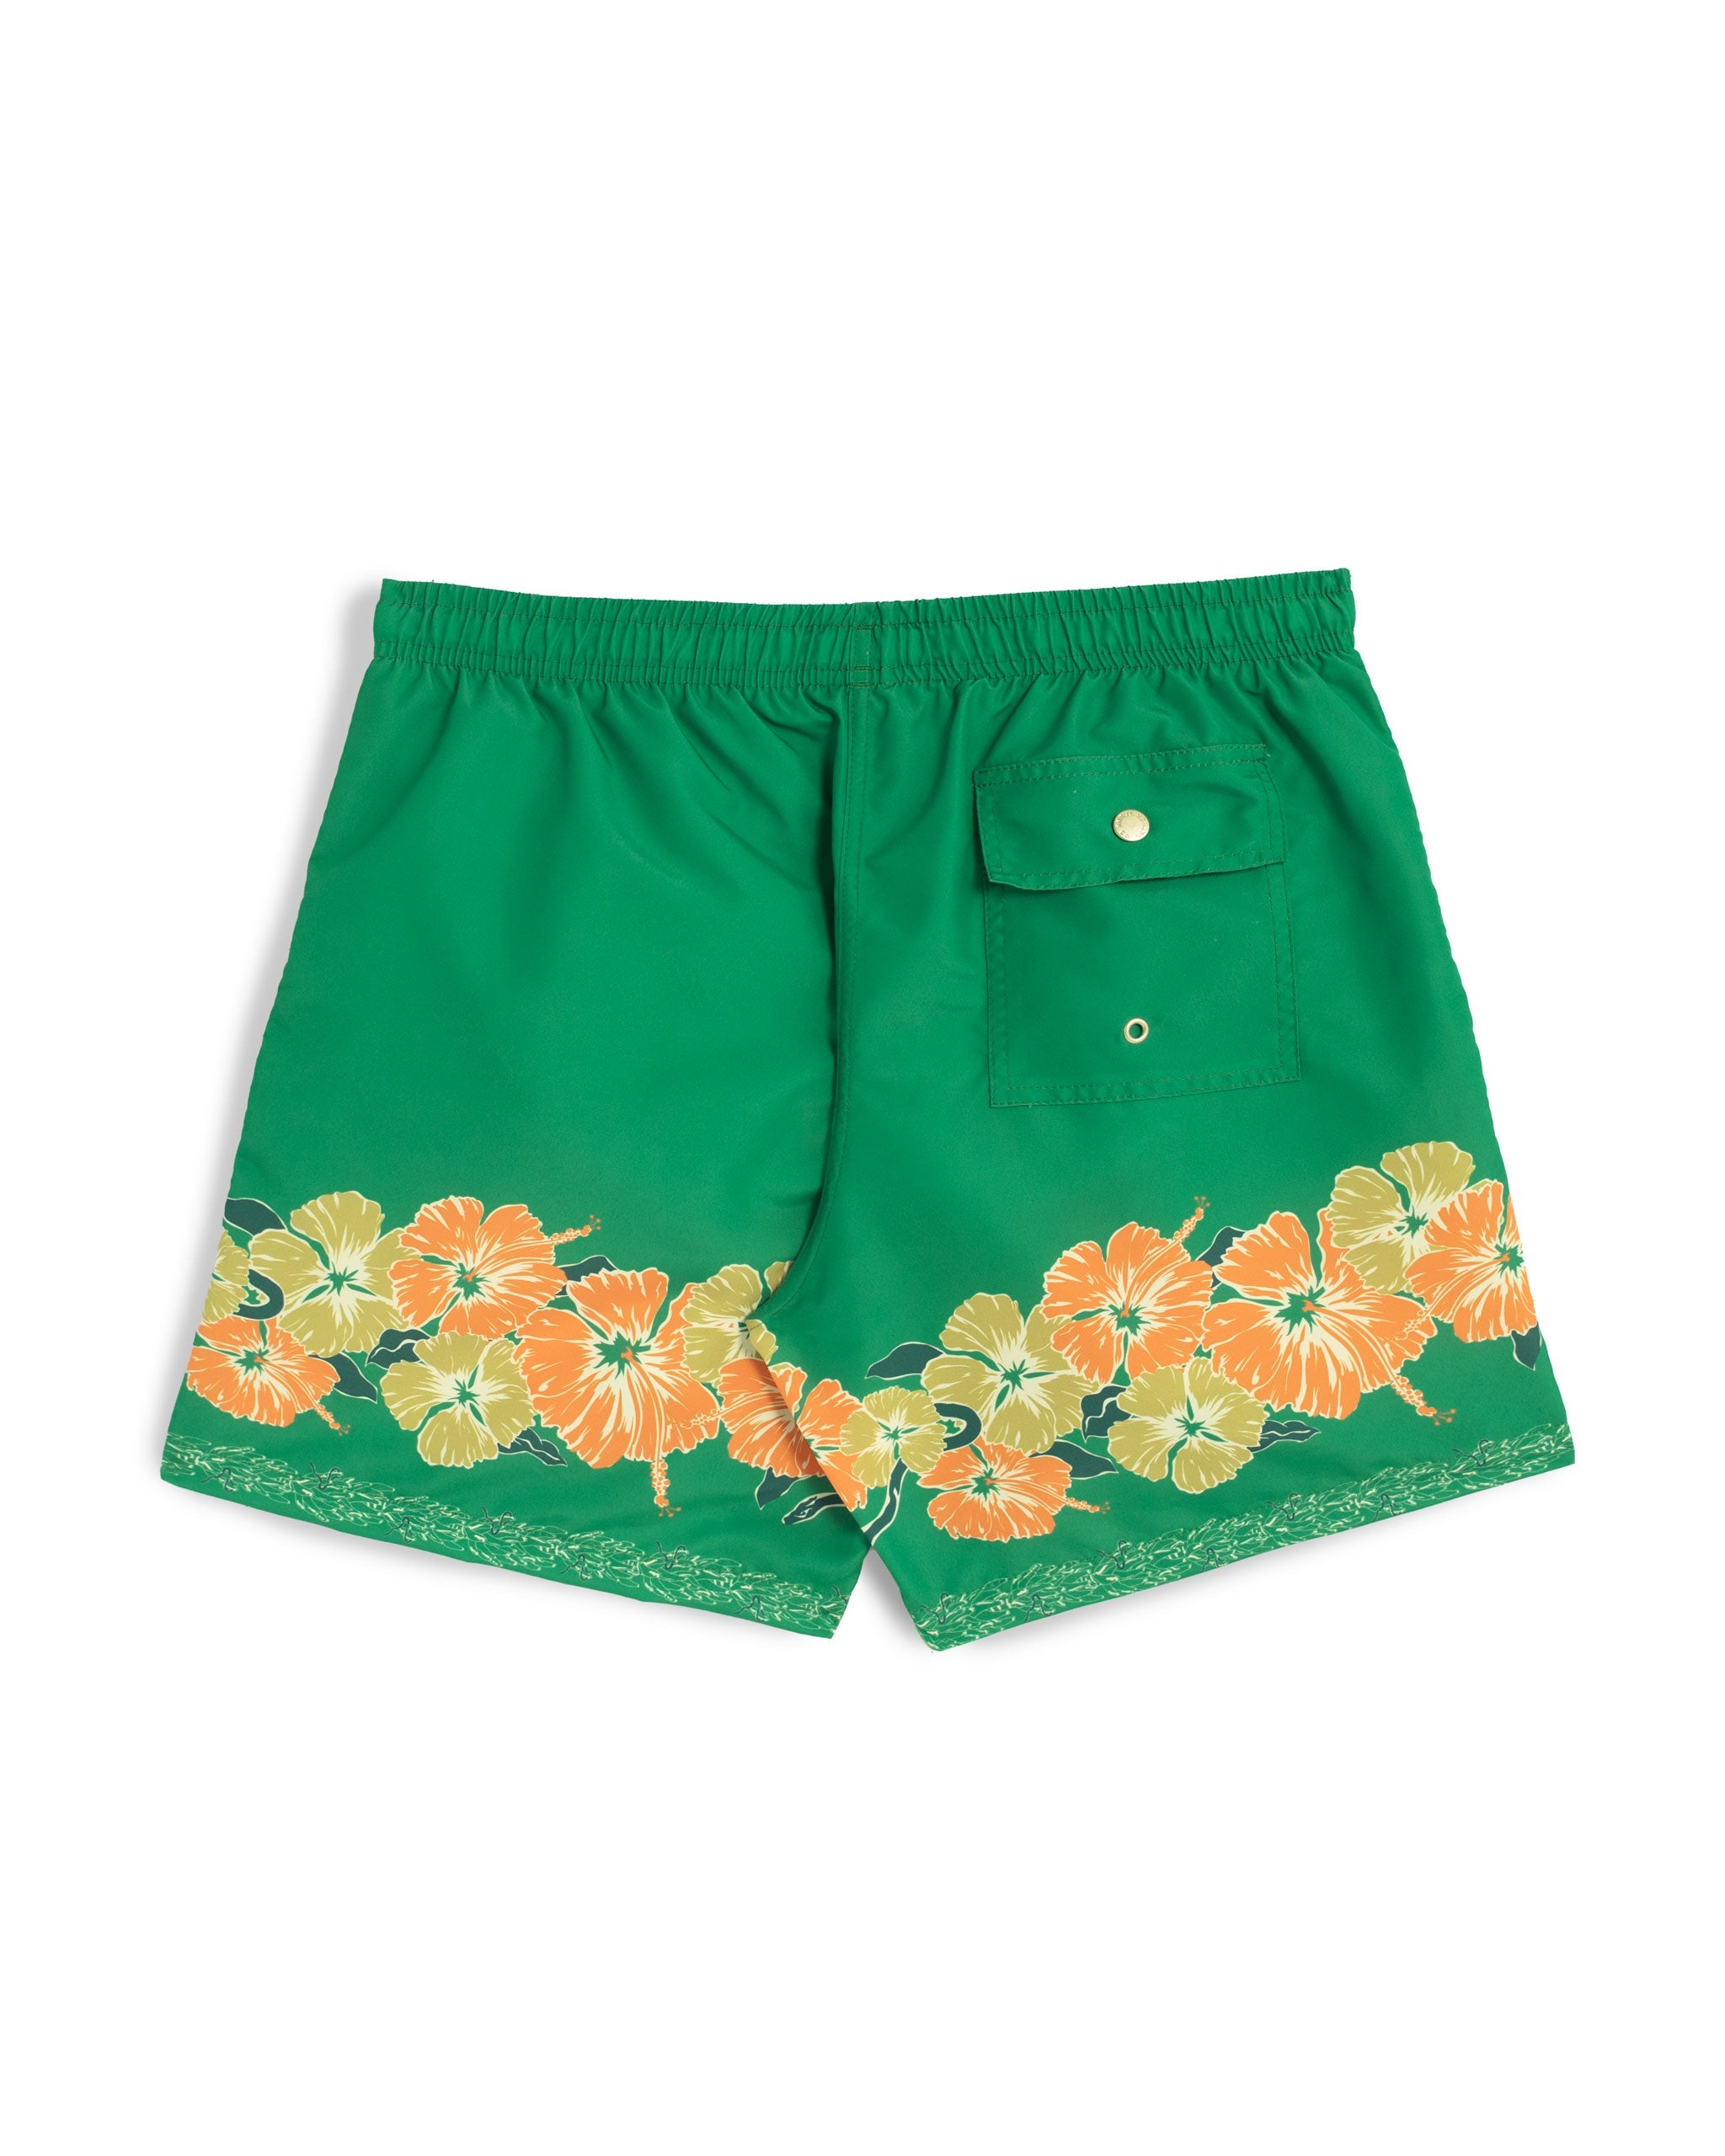 back shot of Green swim trunk with floral motif pattern on the bottom of the leg